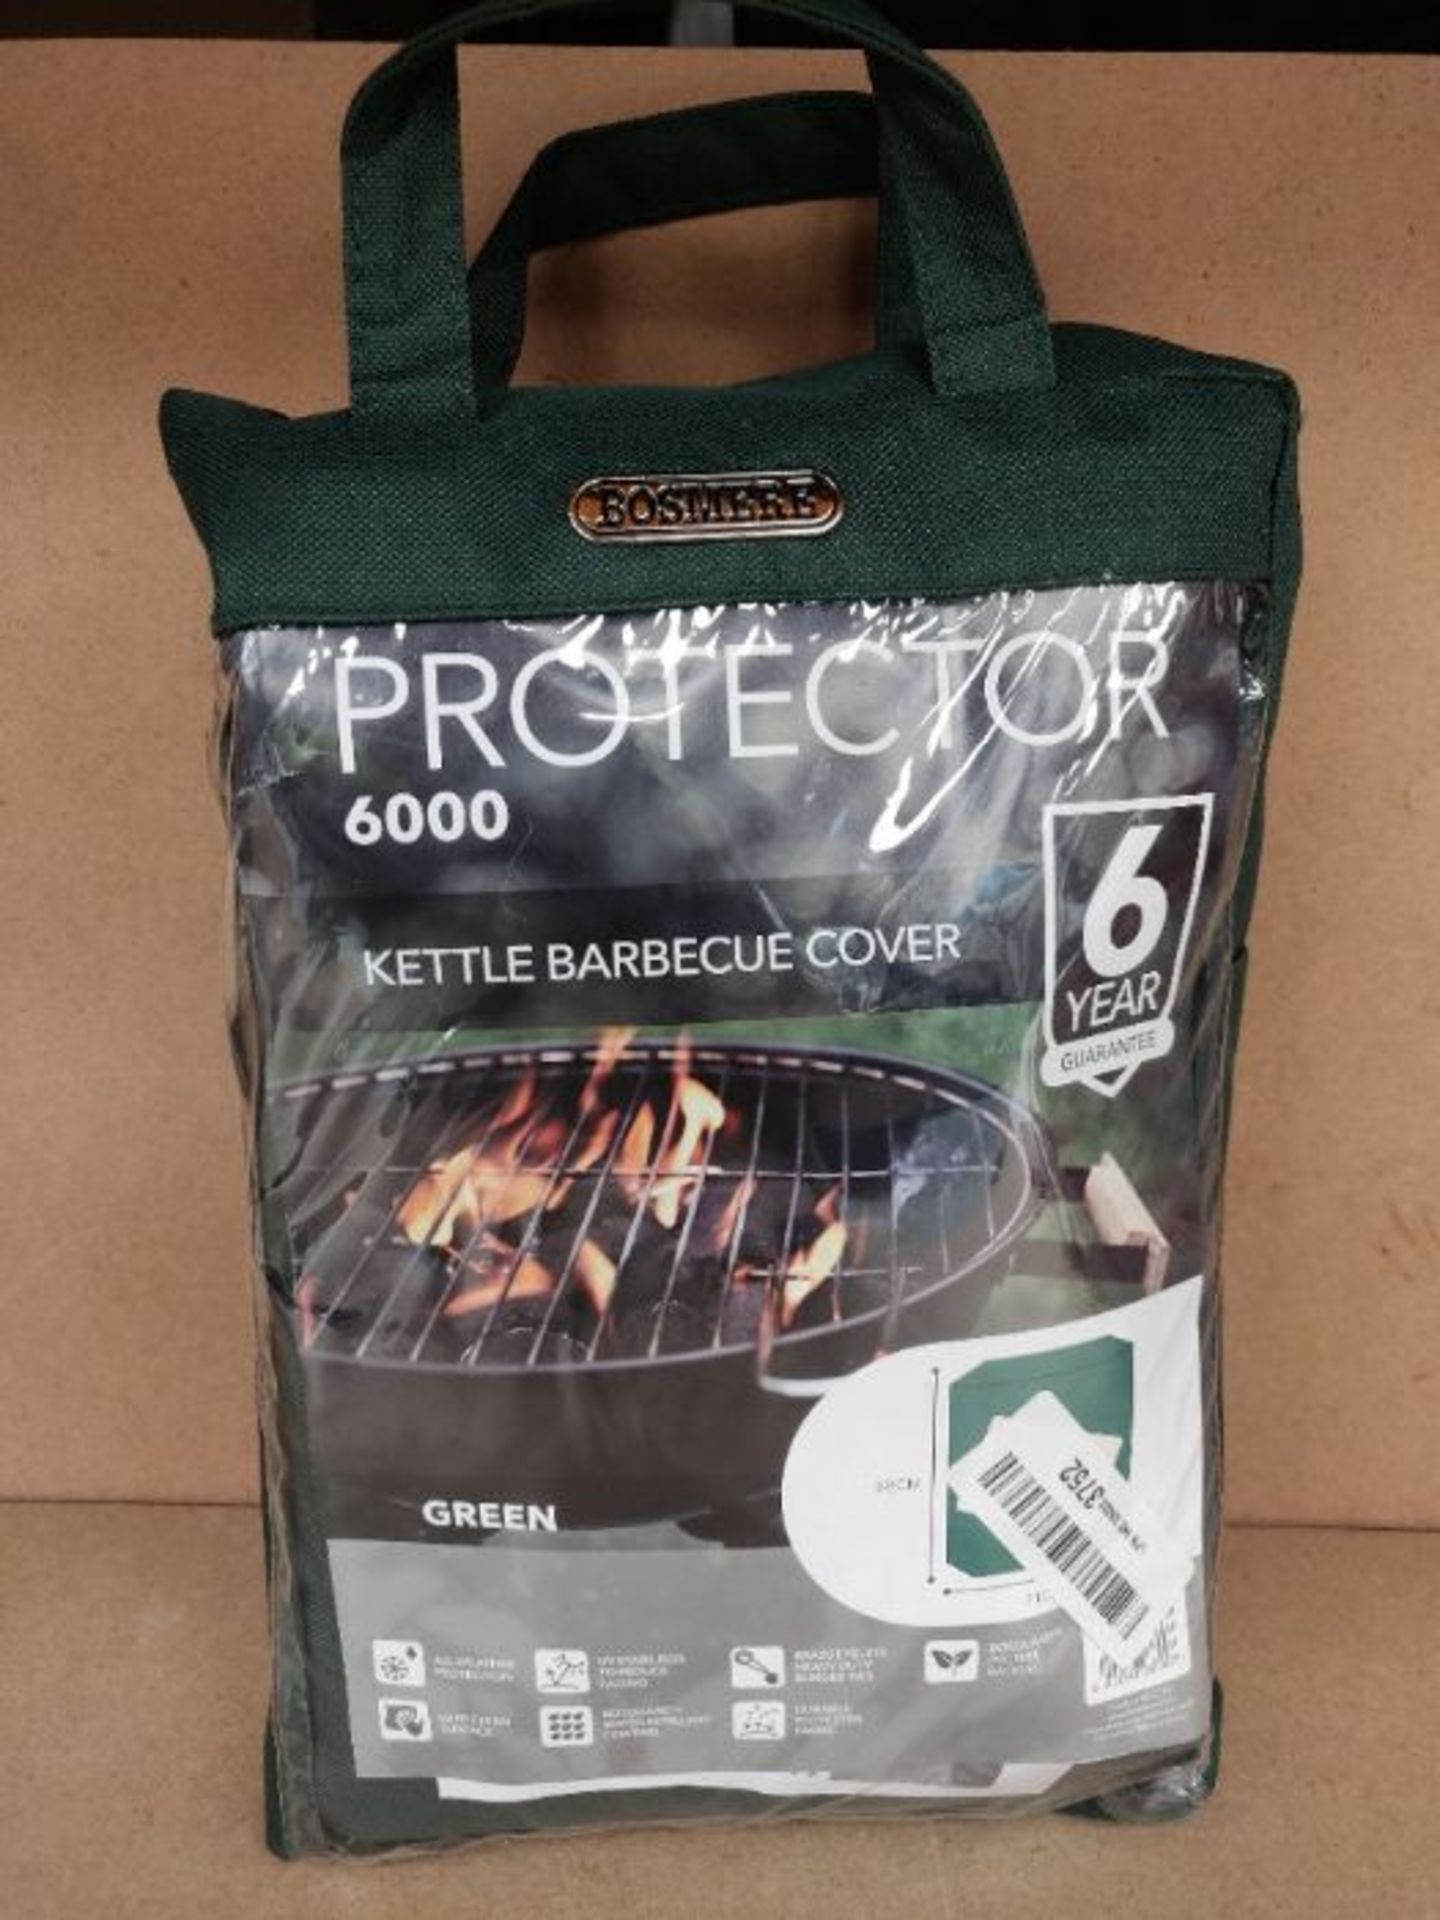 Bosmere Protector 6000 Dark Green Kettle BBQ Cover - Green, C700 - Image 2 of 2